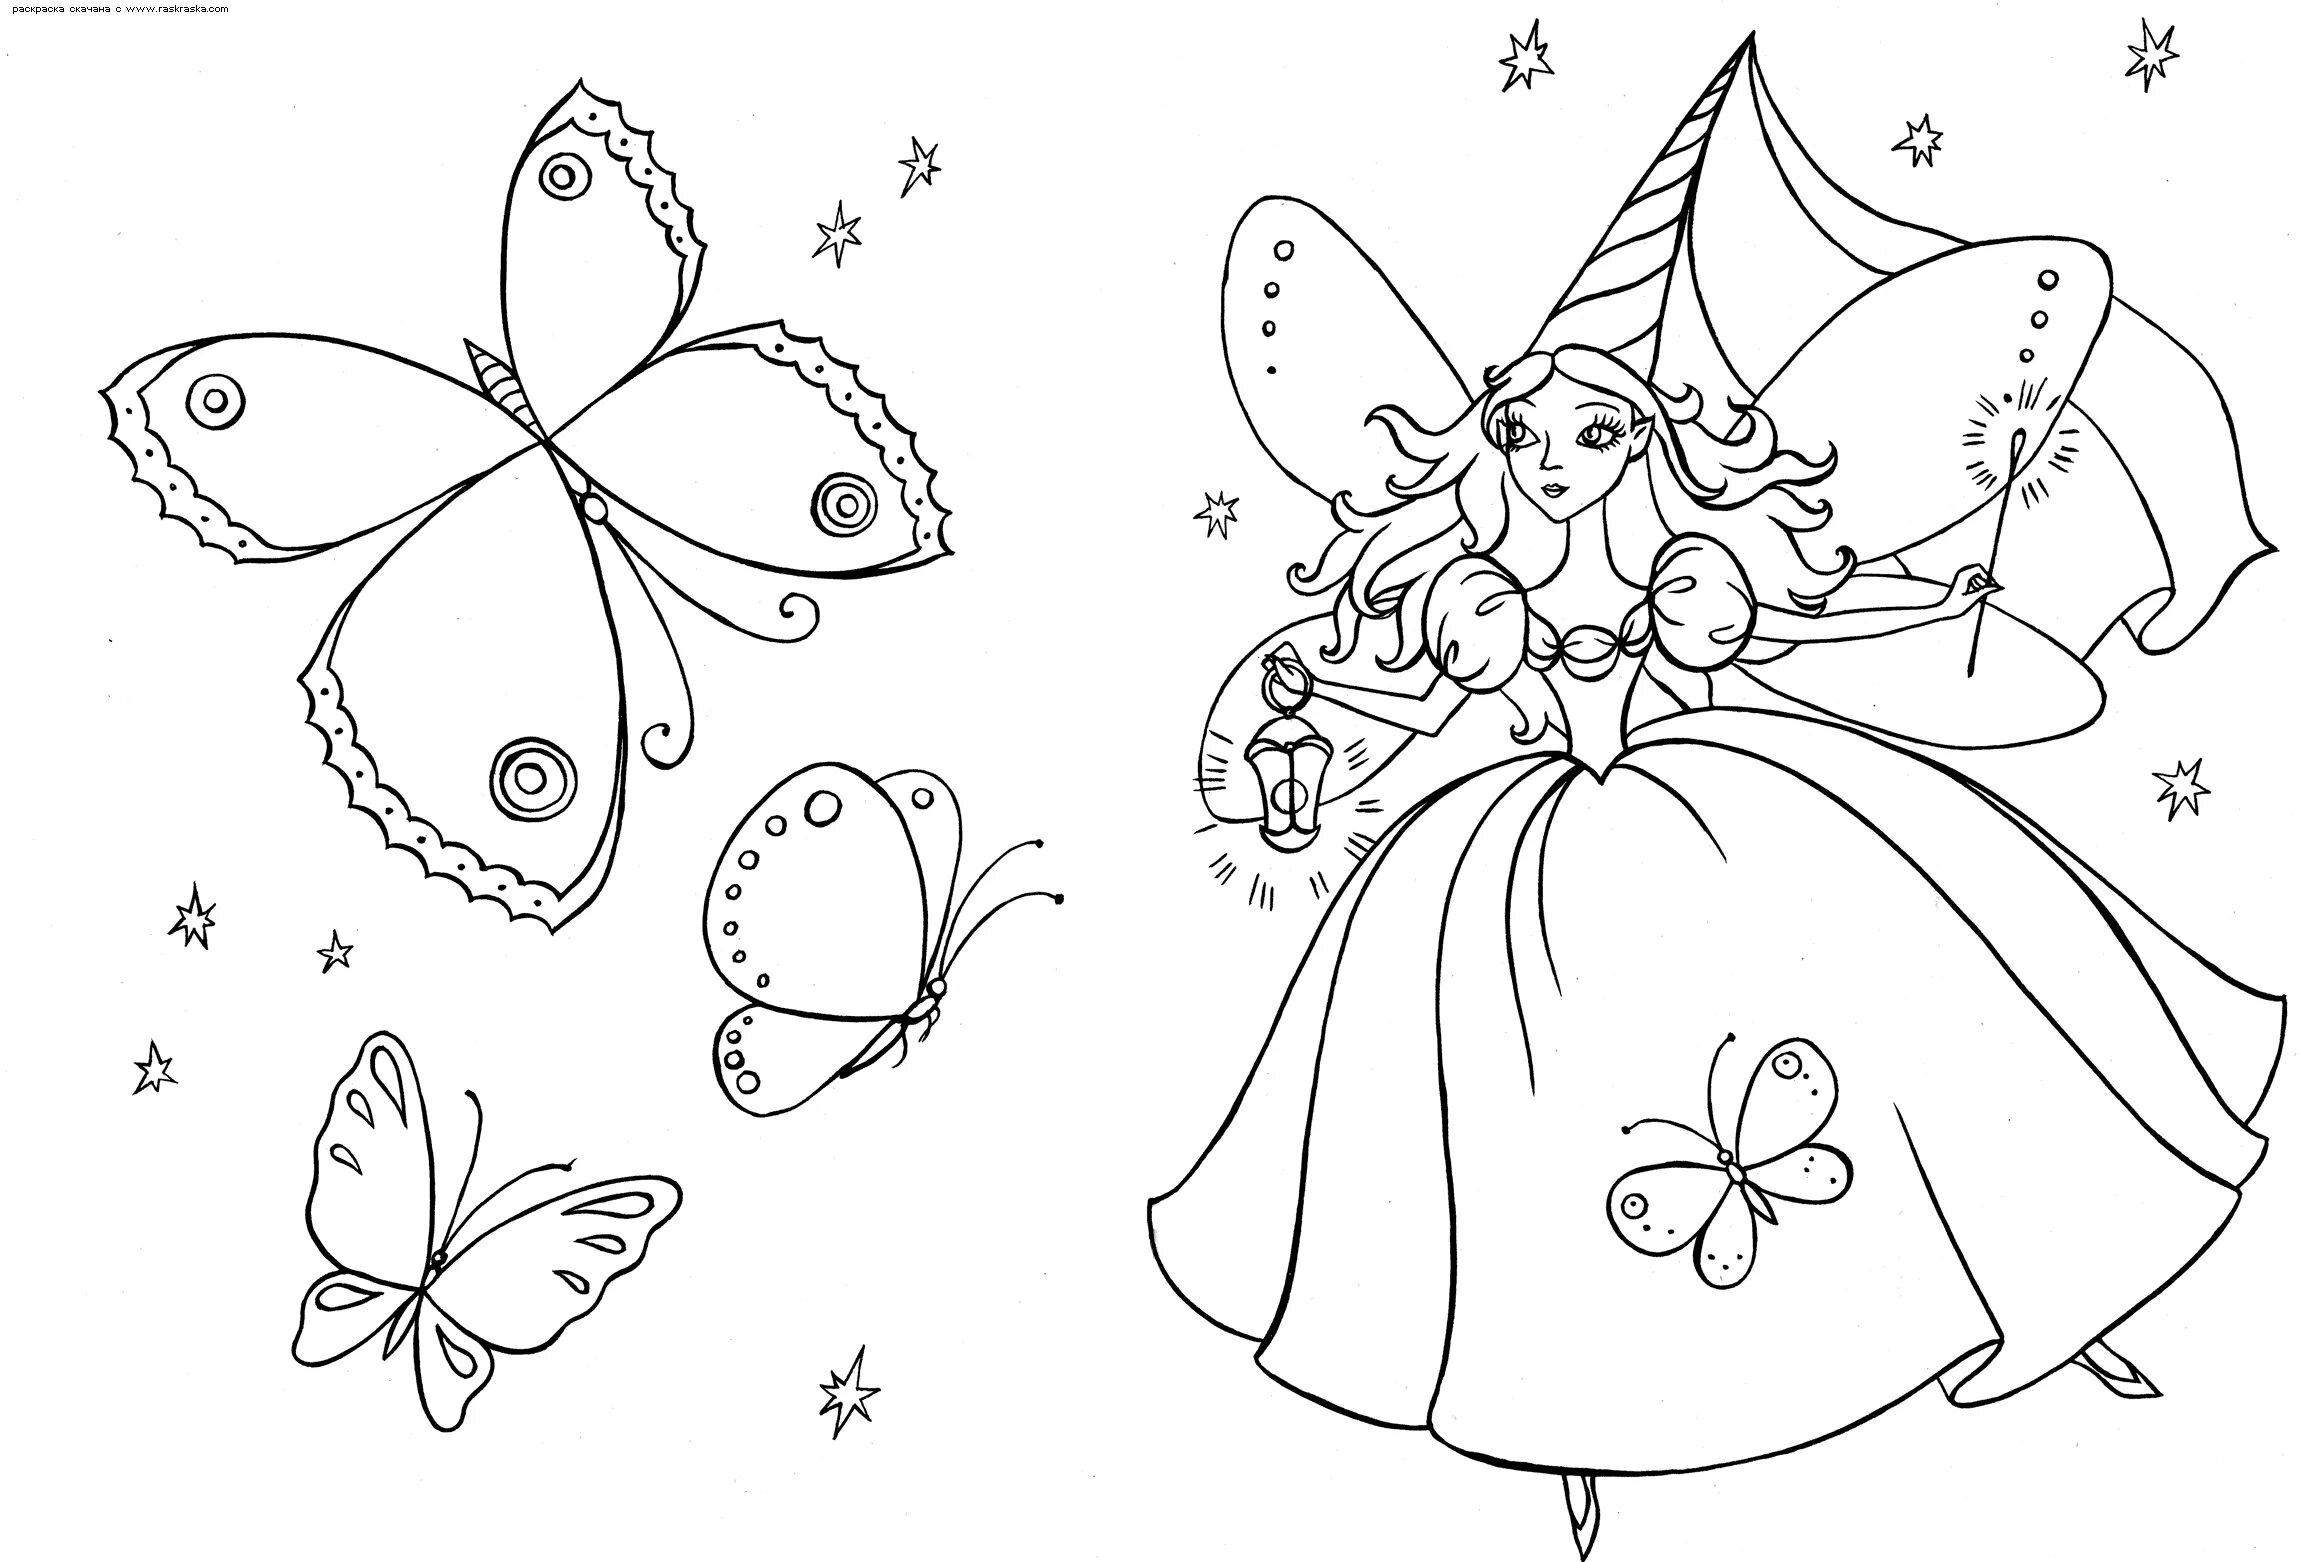 Magic coloring book for kids filled with joy